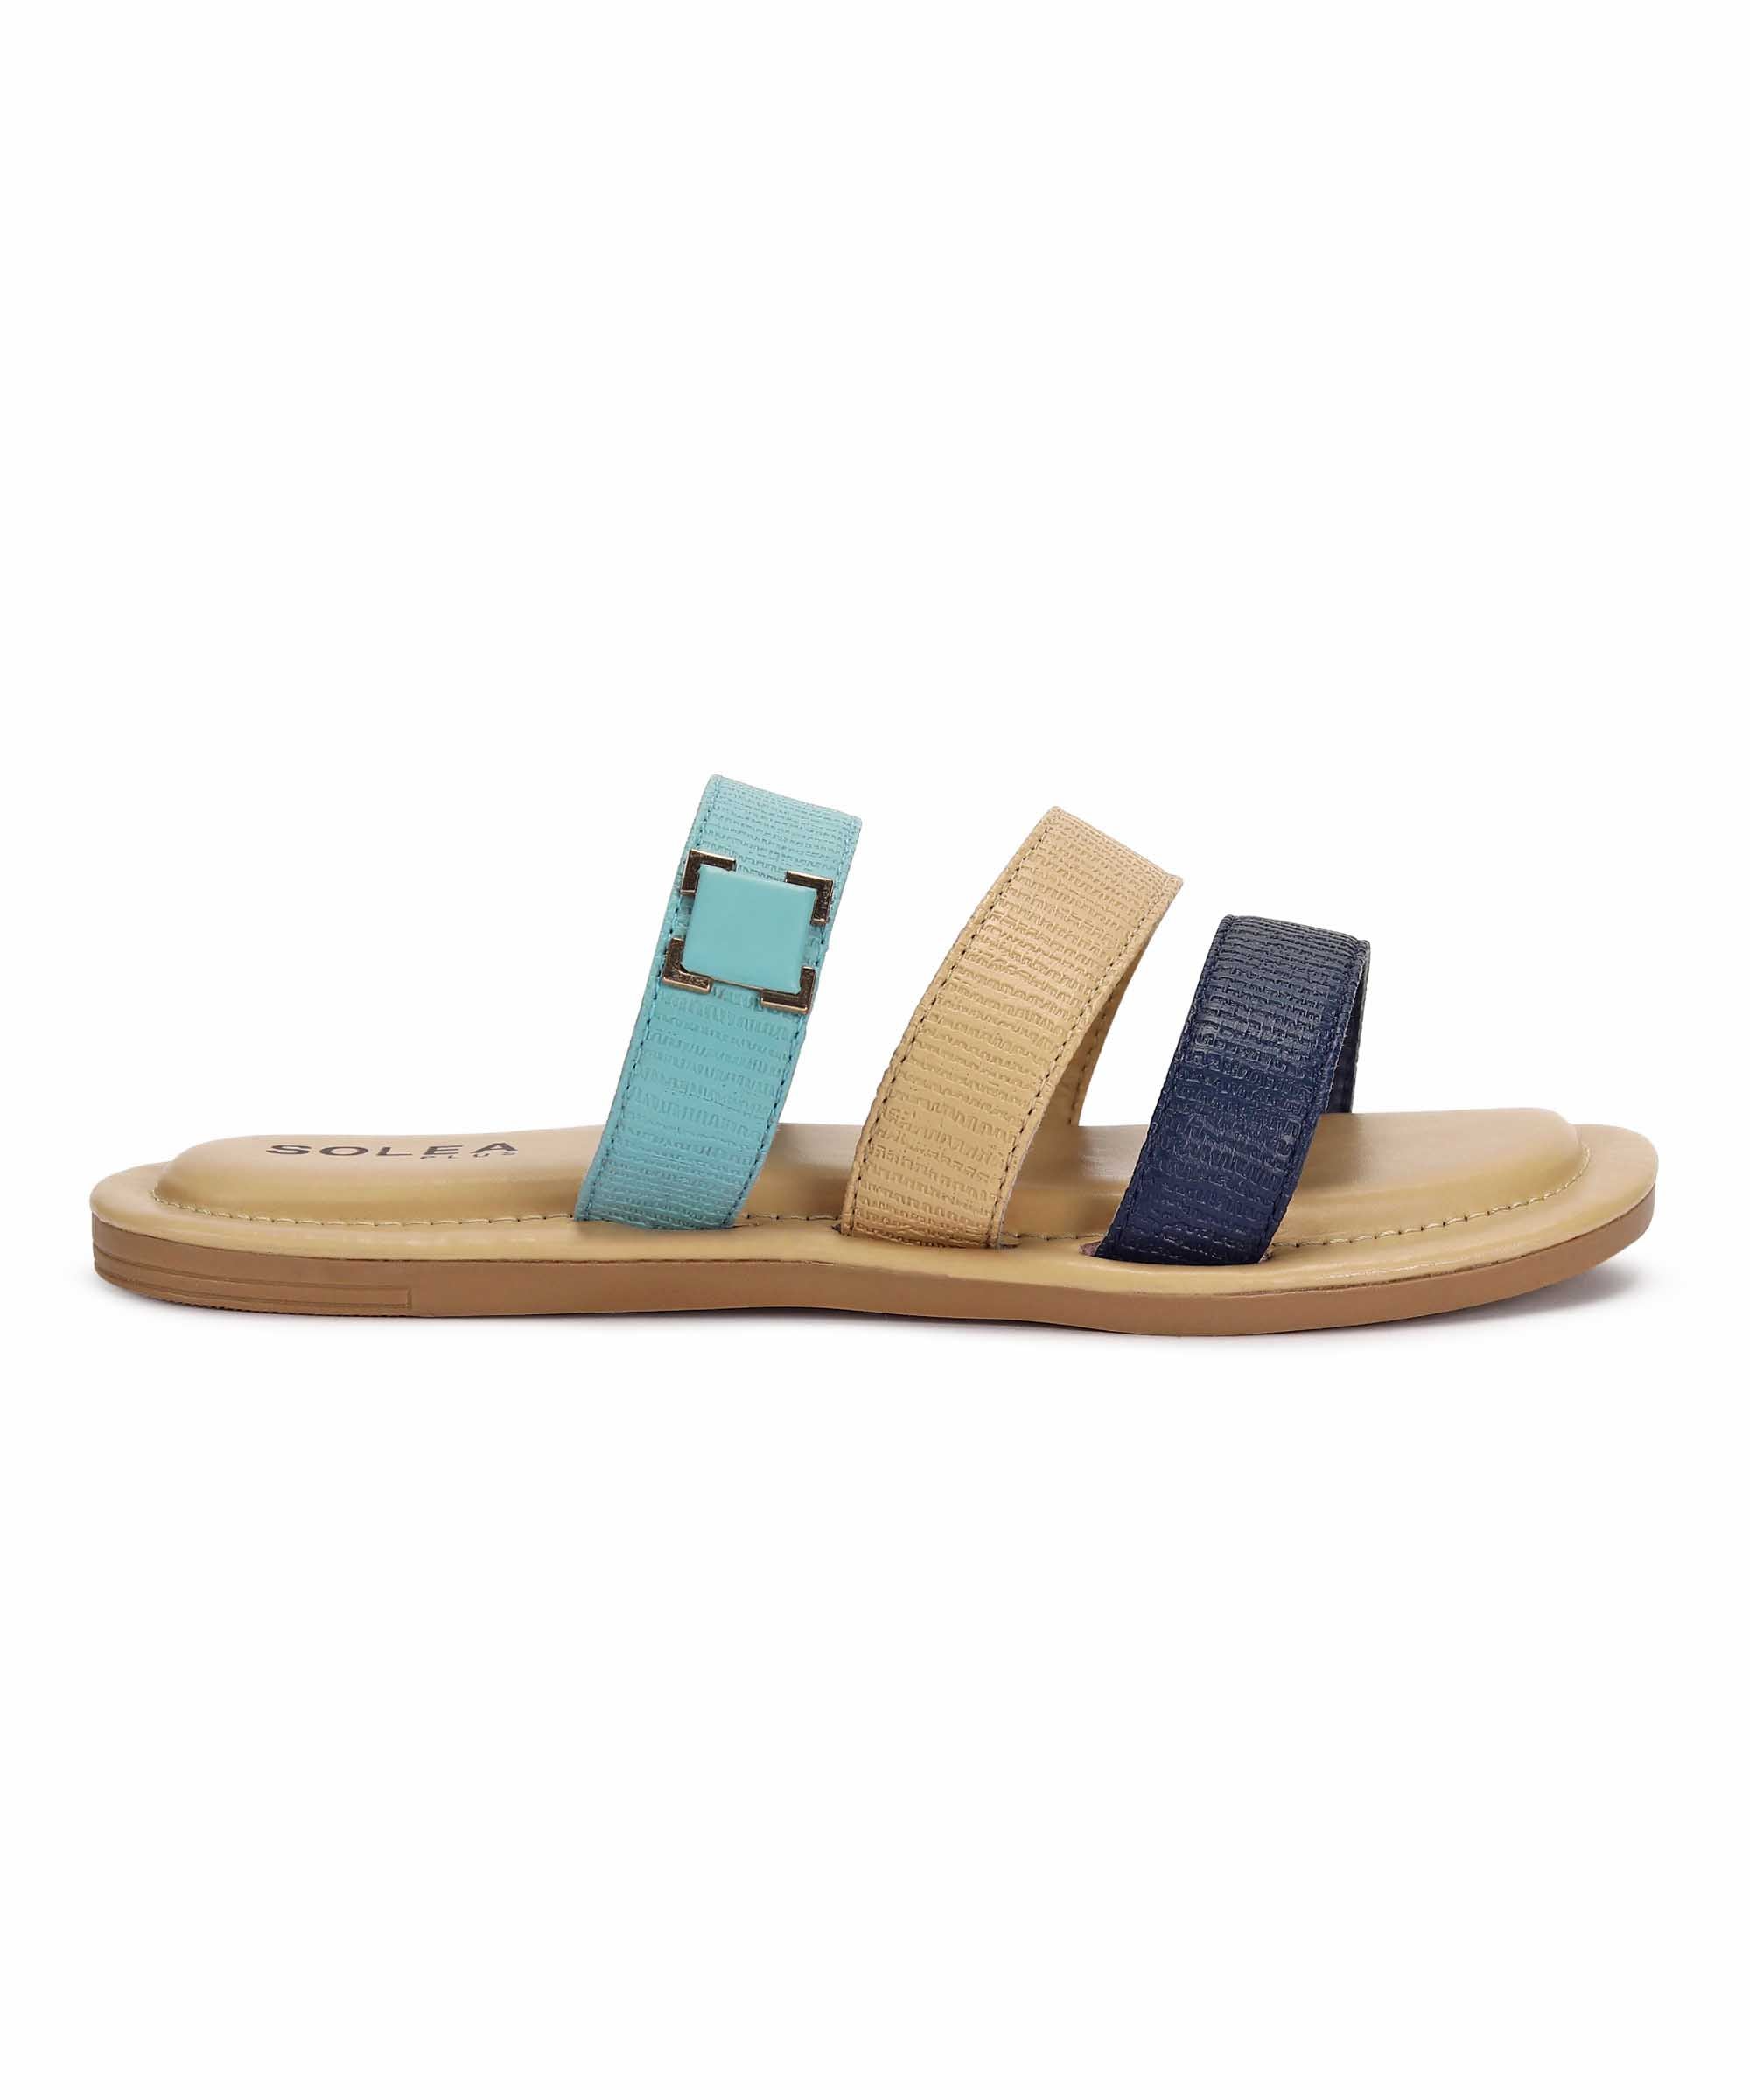 Paragon K6019L Women Sandals | Casual &amp; Formal Sandals | Stylish, Comfortable &amp; Durable | For Daily &amp; Occasion Wear